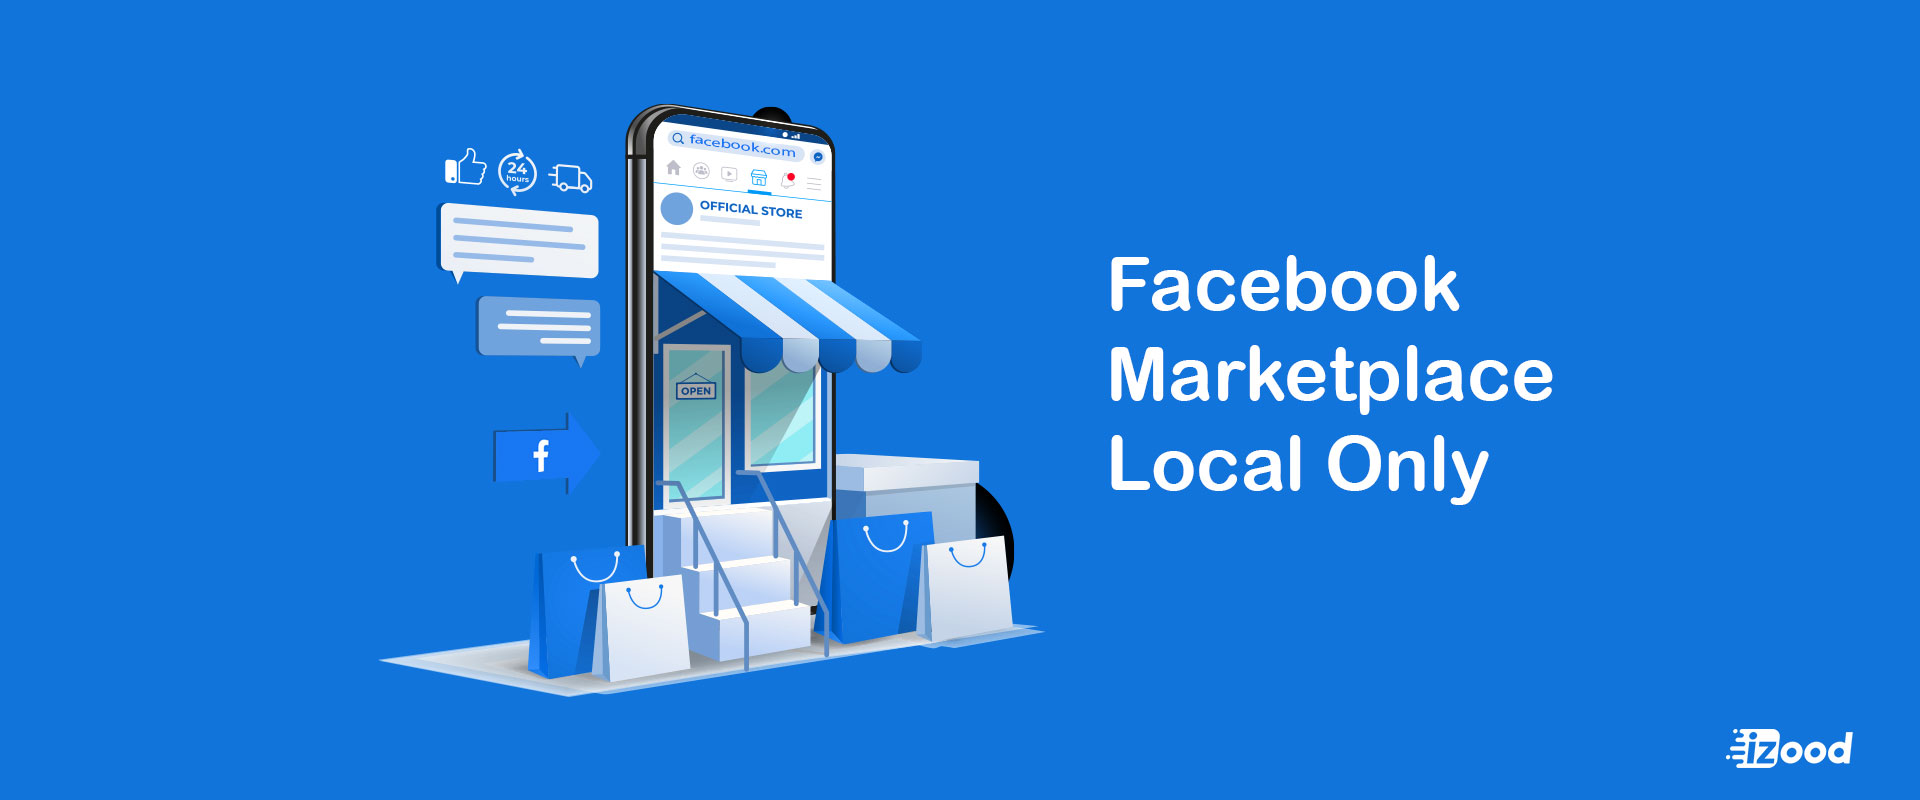 Facebook Marketplace Local Only How to enable and use it 2023? Izood